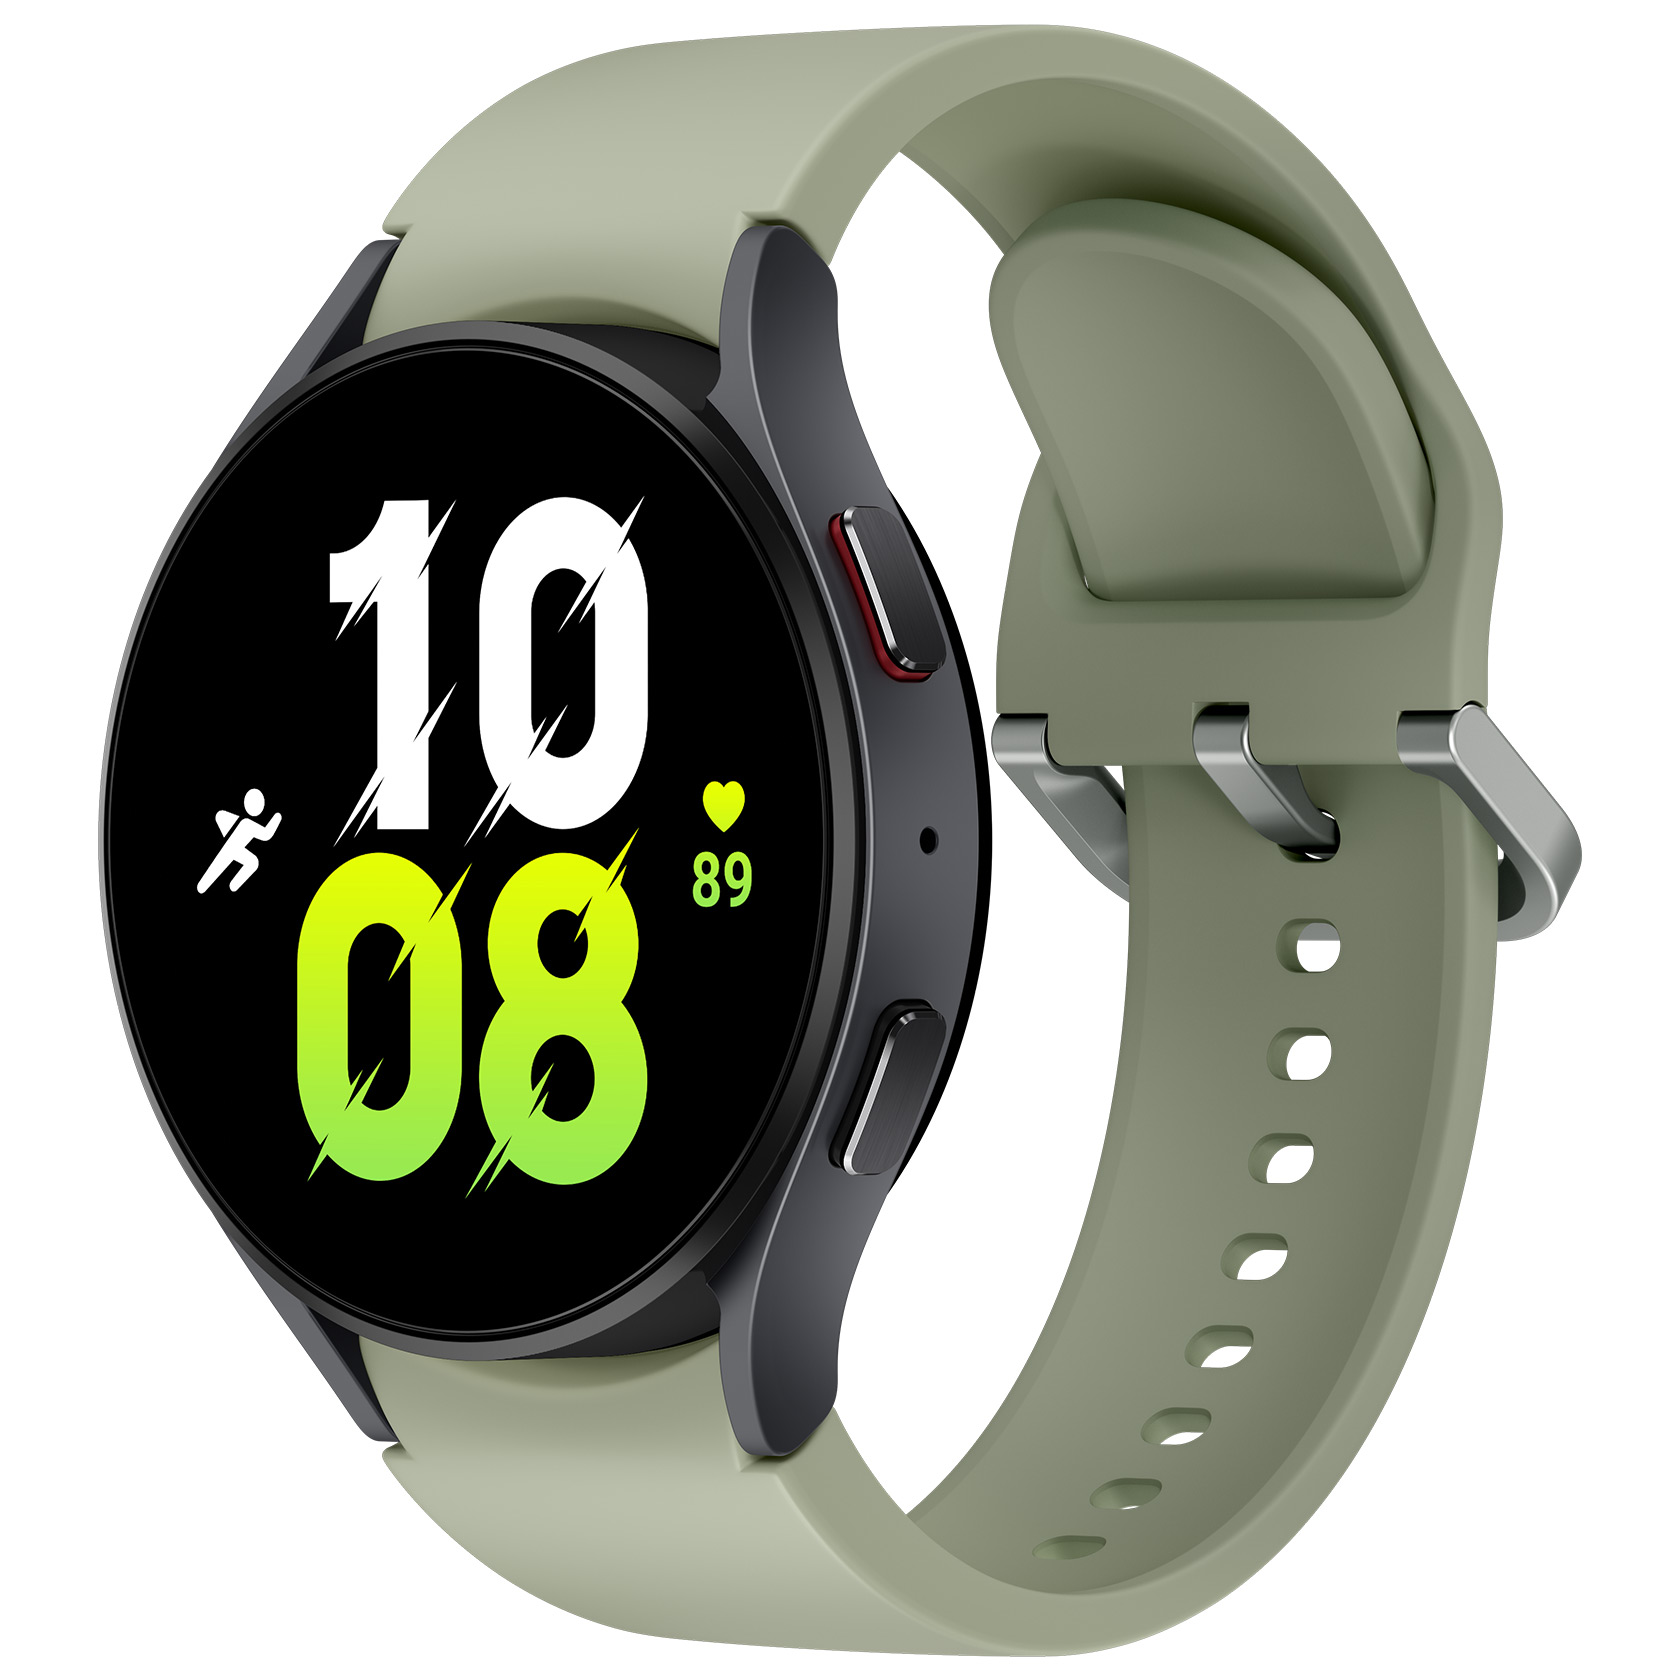 Samsung Galaxy Watch 5 Bespoke Edition with silver case and olive green band